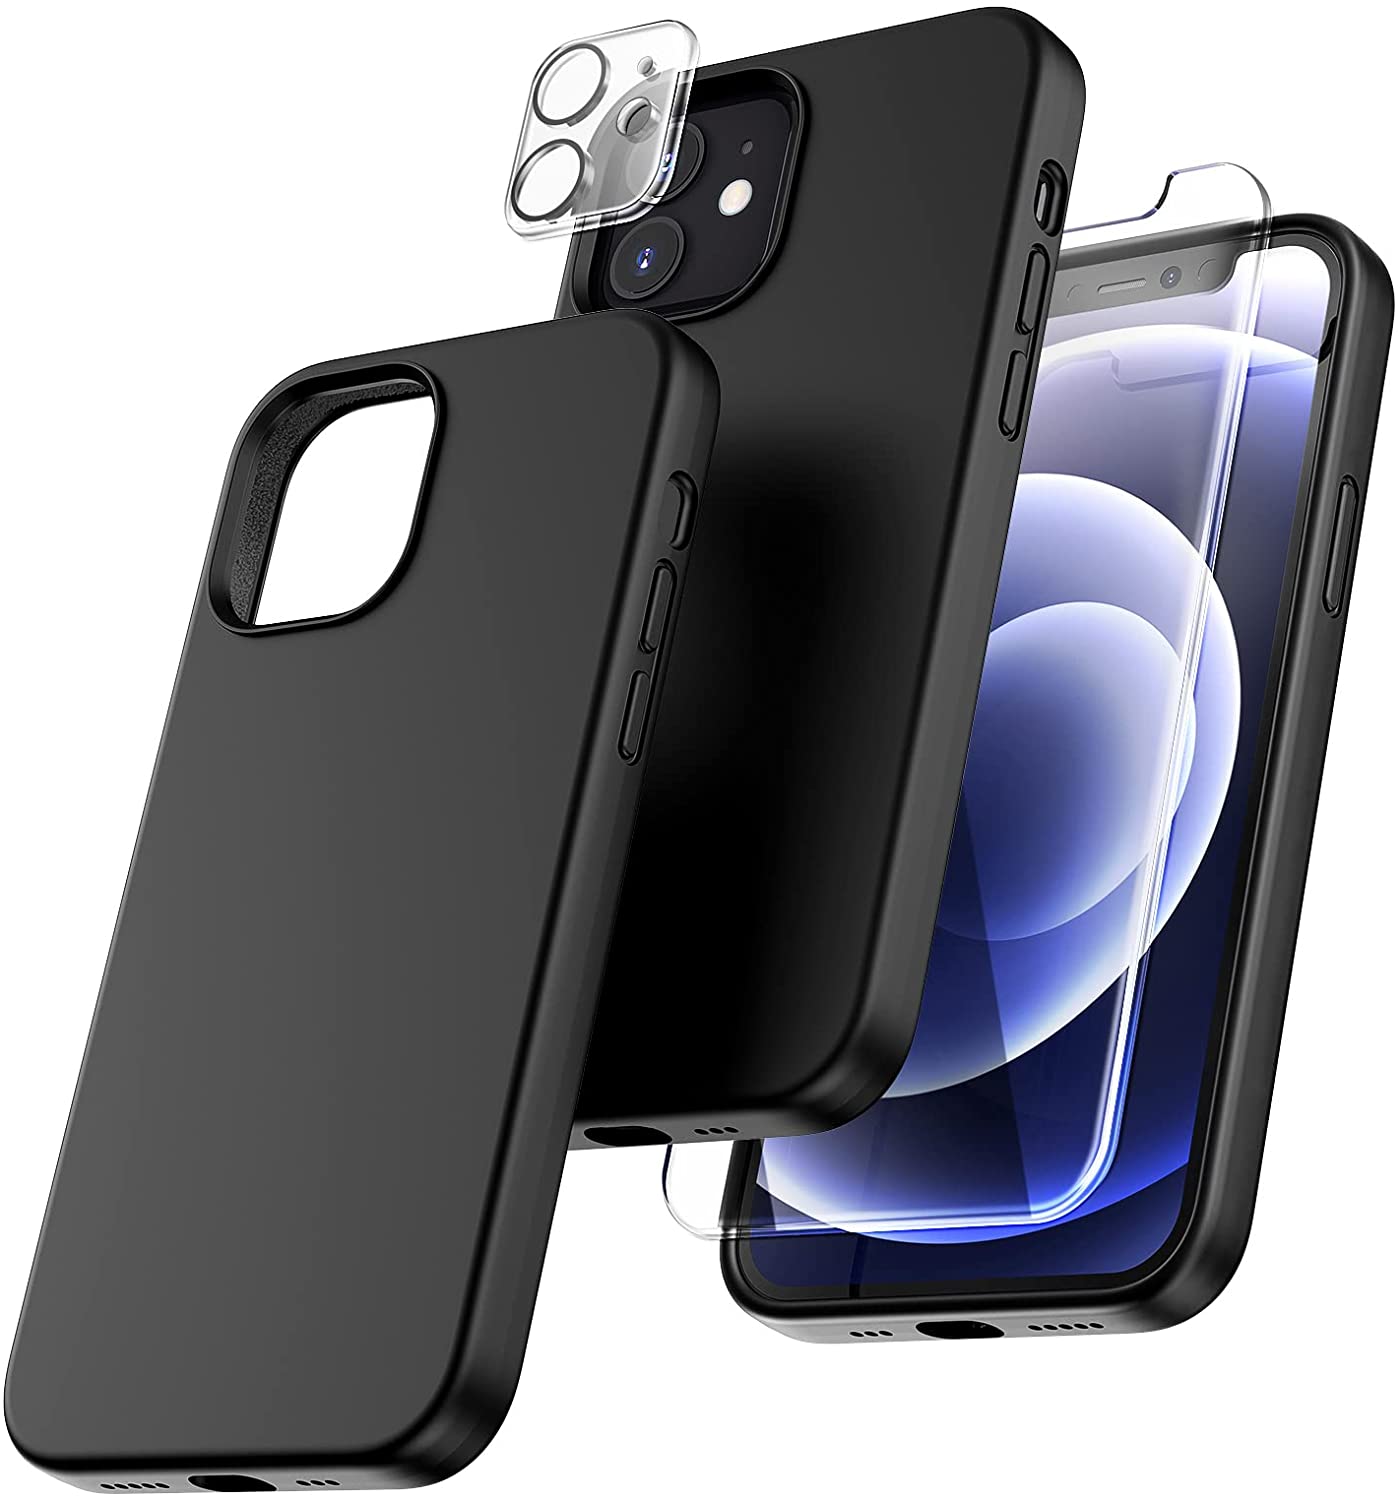 TOCOL [5 in 1] for iPhone 12 Case, for iPhone 12 Pro Case, with 2 Pack Screen Protector + 2 Pack Camera Lens Protector, Silicone Shockproof Phone Case [Anti-Scratch] [Drop Protection], Black